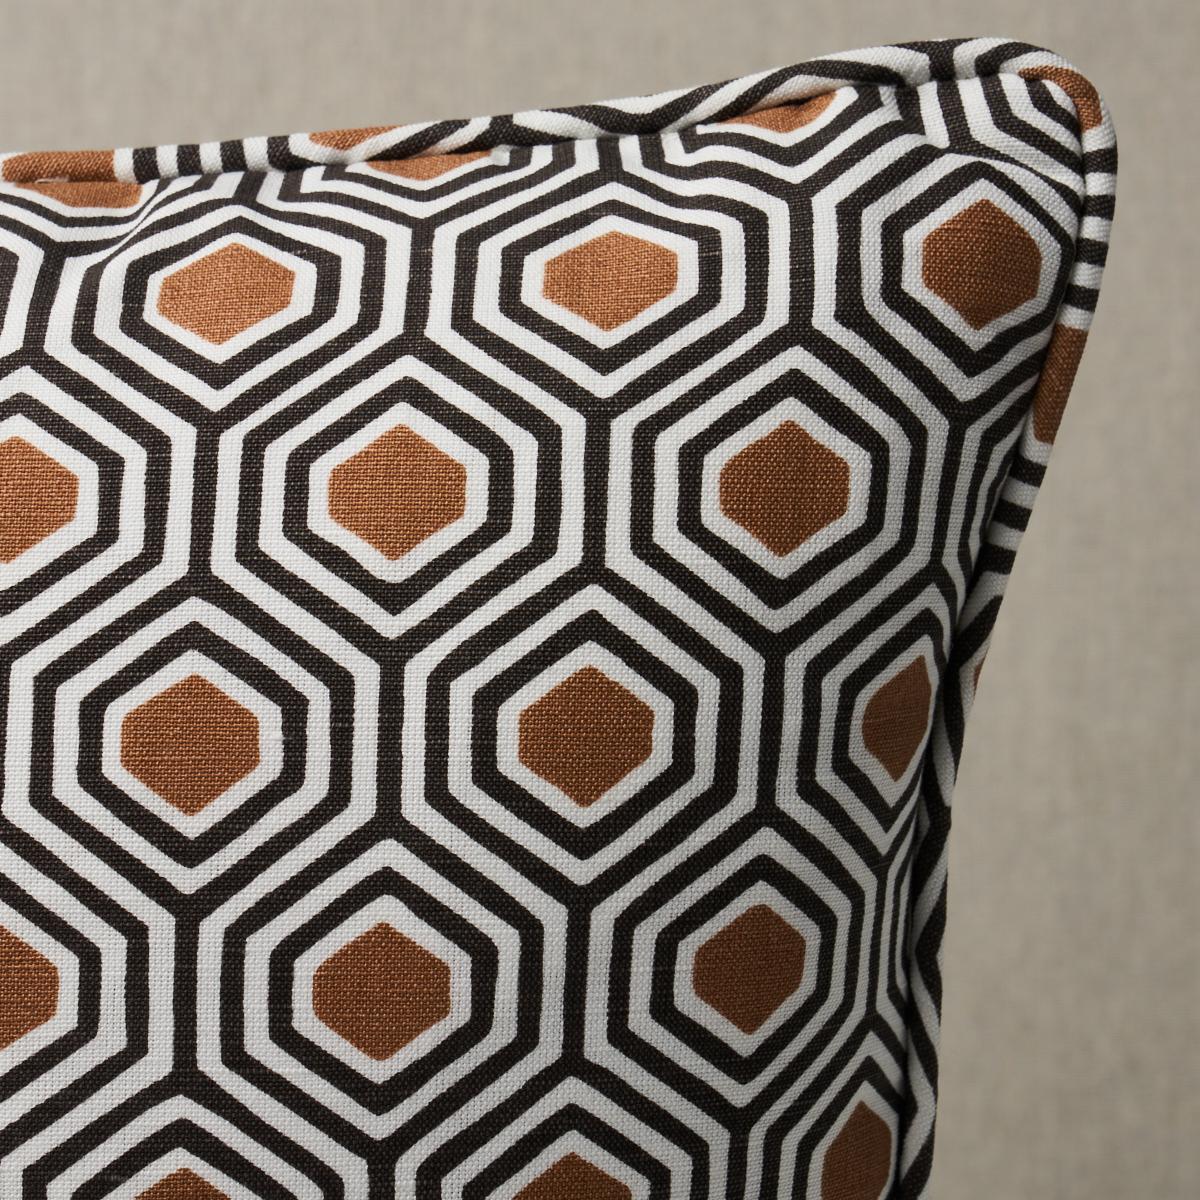 This pillow features Otis Hand Print with a self welt finish. Otis in dark neutral is a fun and cheerful geometric fabric that sits on the groovier side of preppy. Hand screen-printed in India on a cotton-linen ground, this design is full of